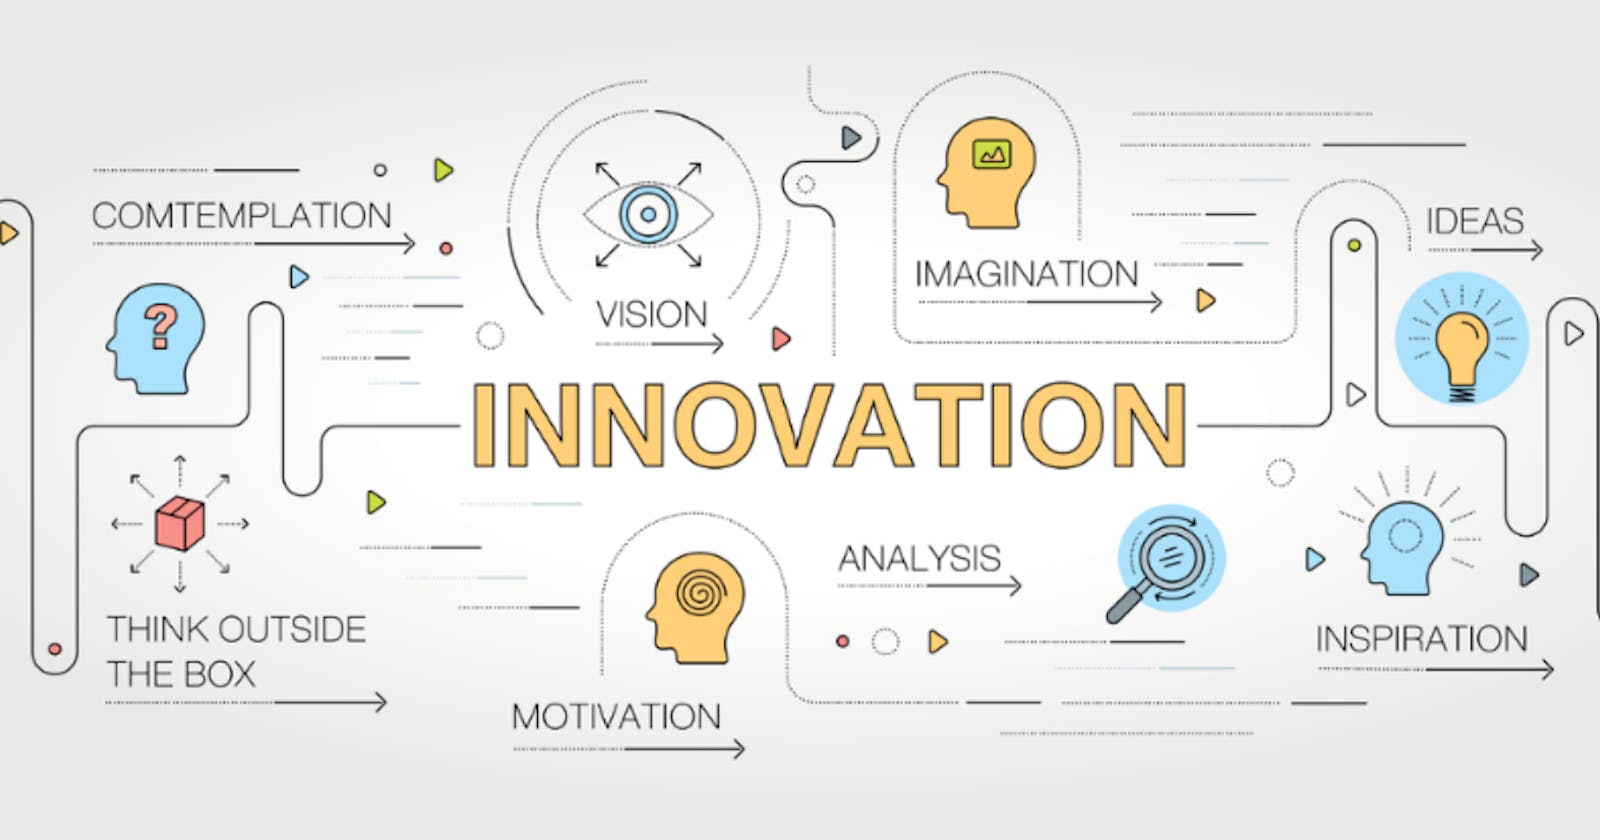 Evaluating Your Innovation Idea